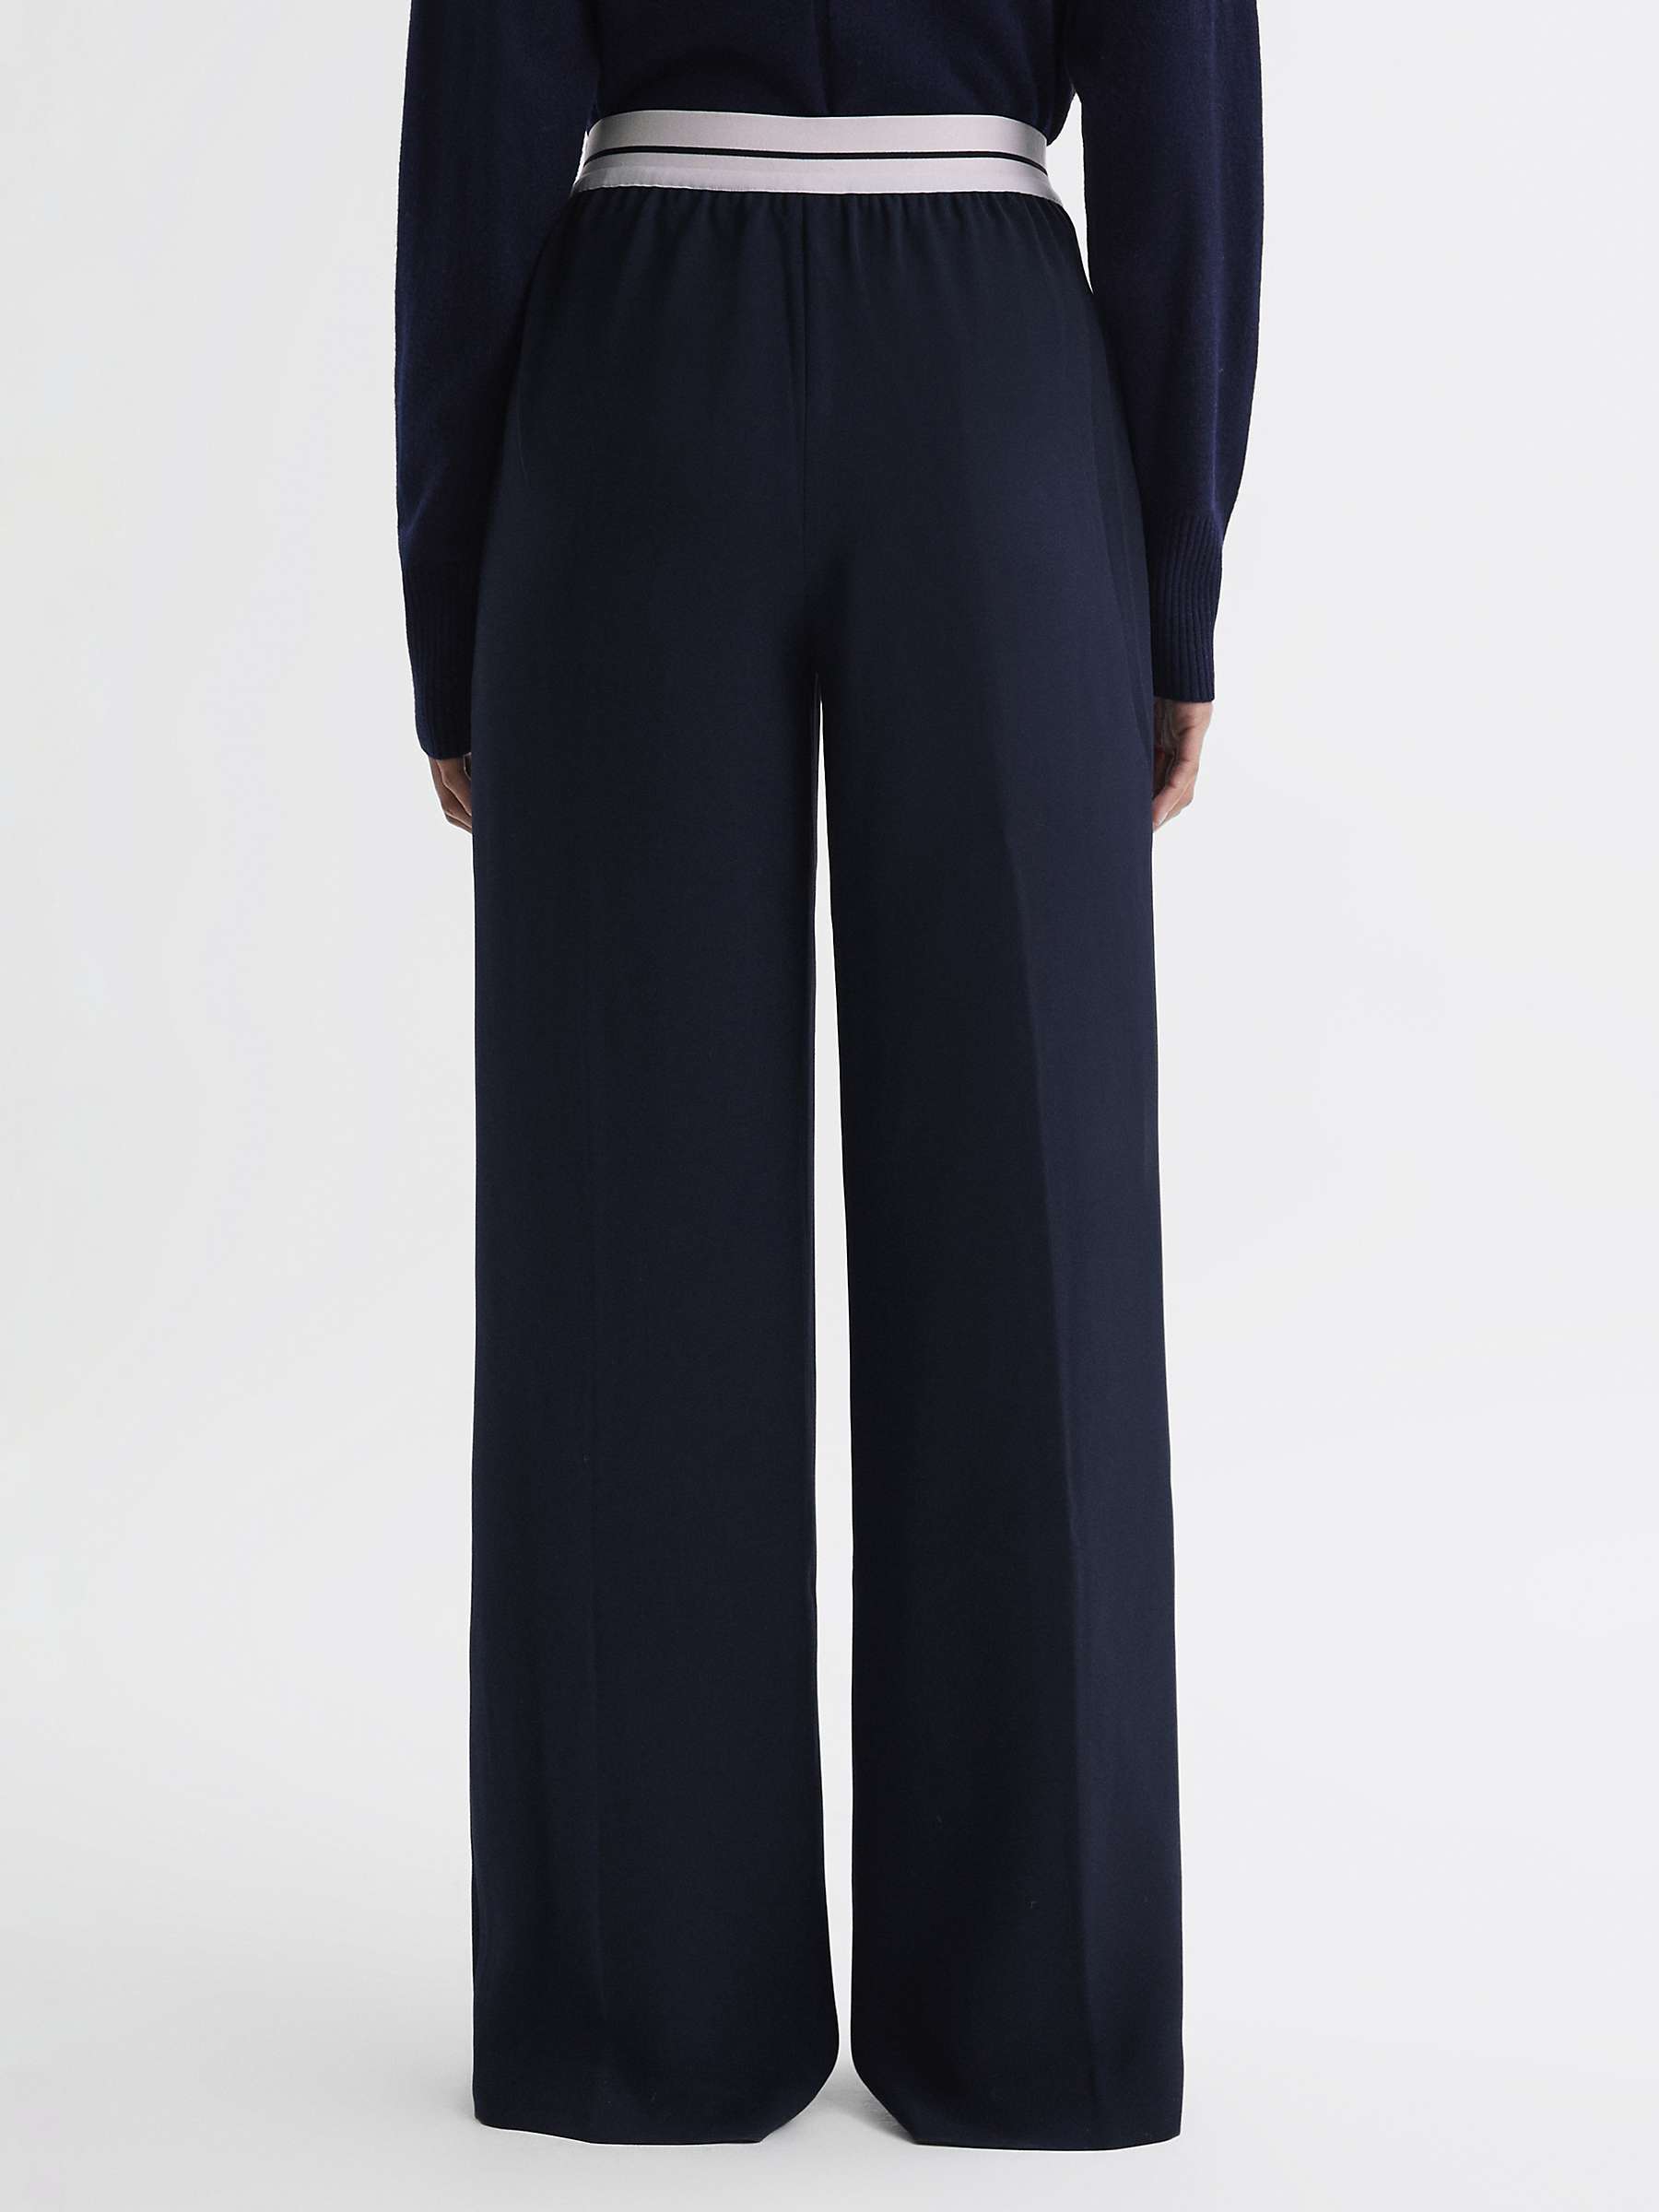 Buy Reiss Abigail Stripe Waistband Trousers Online at johnlewis.com